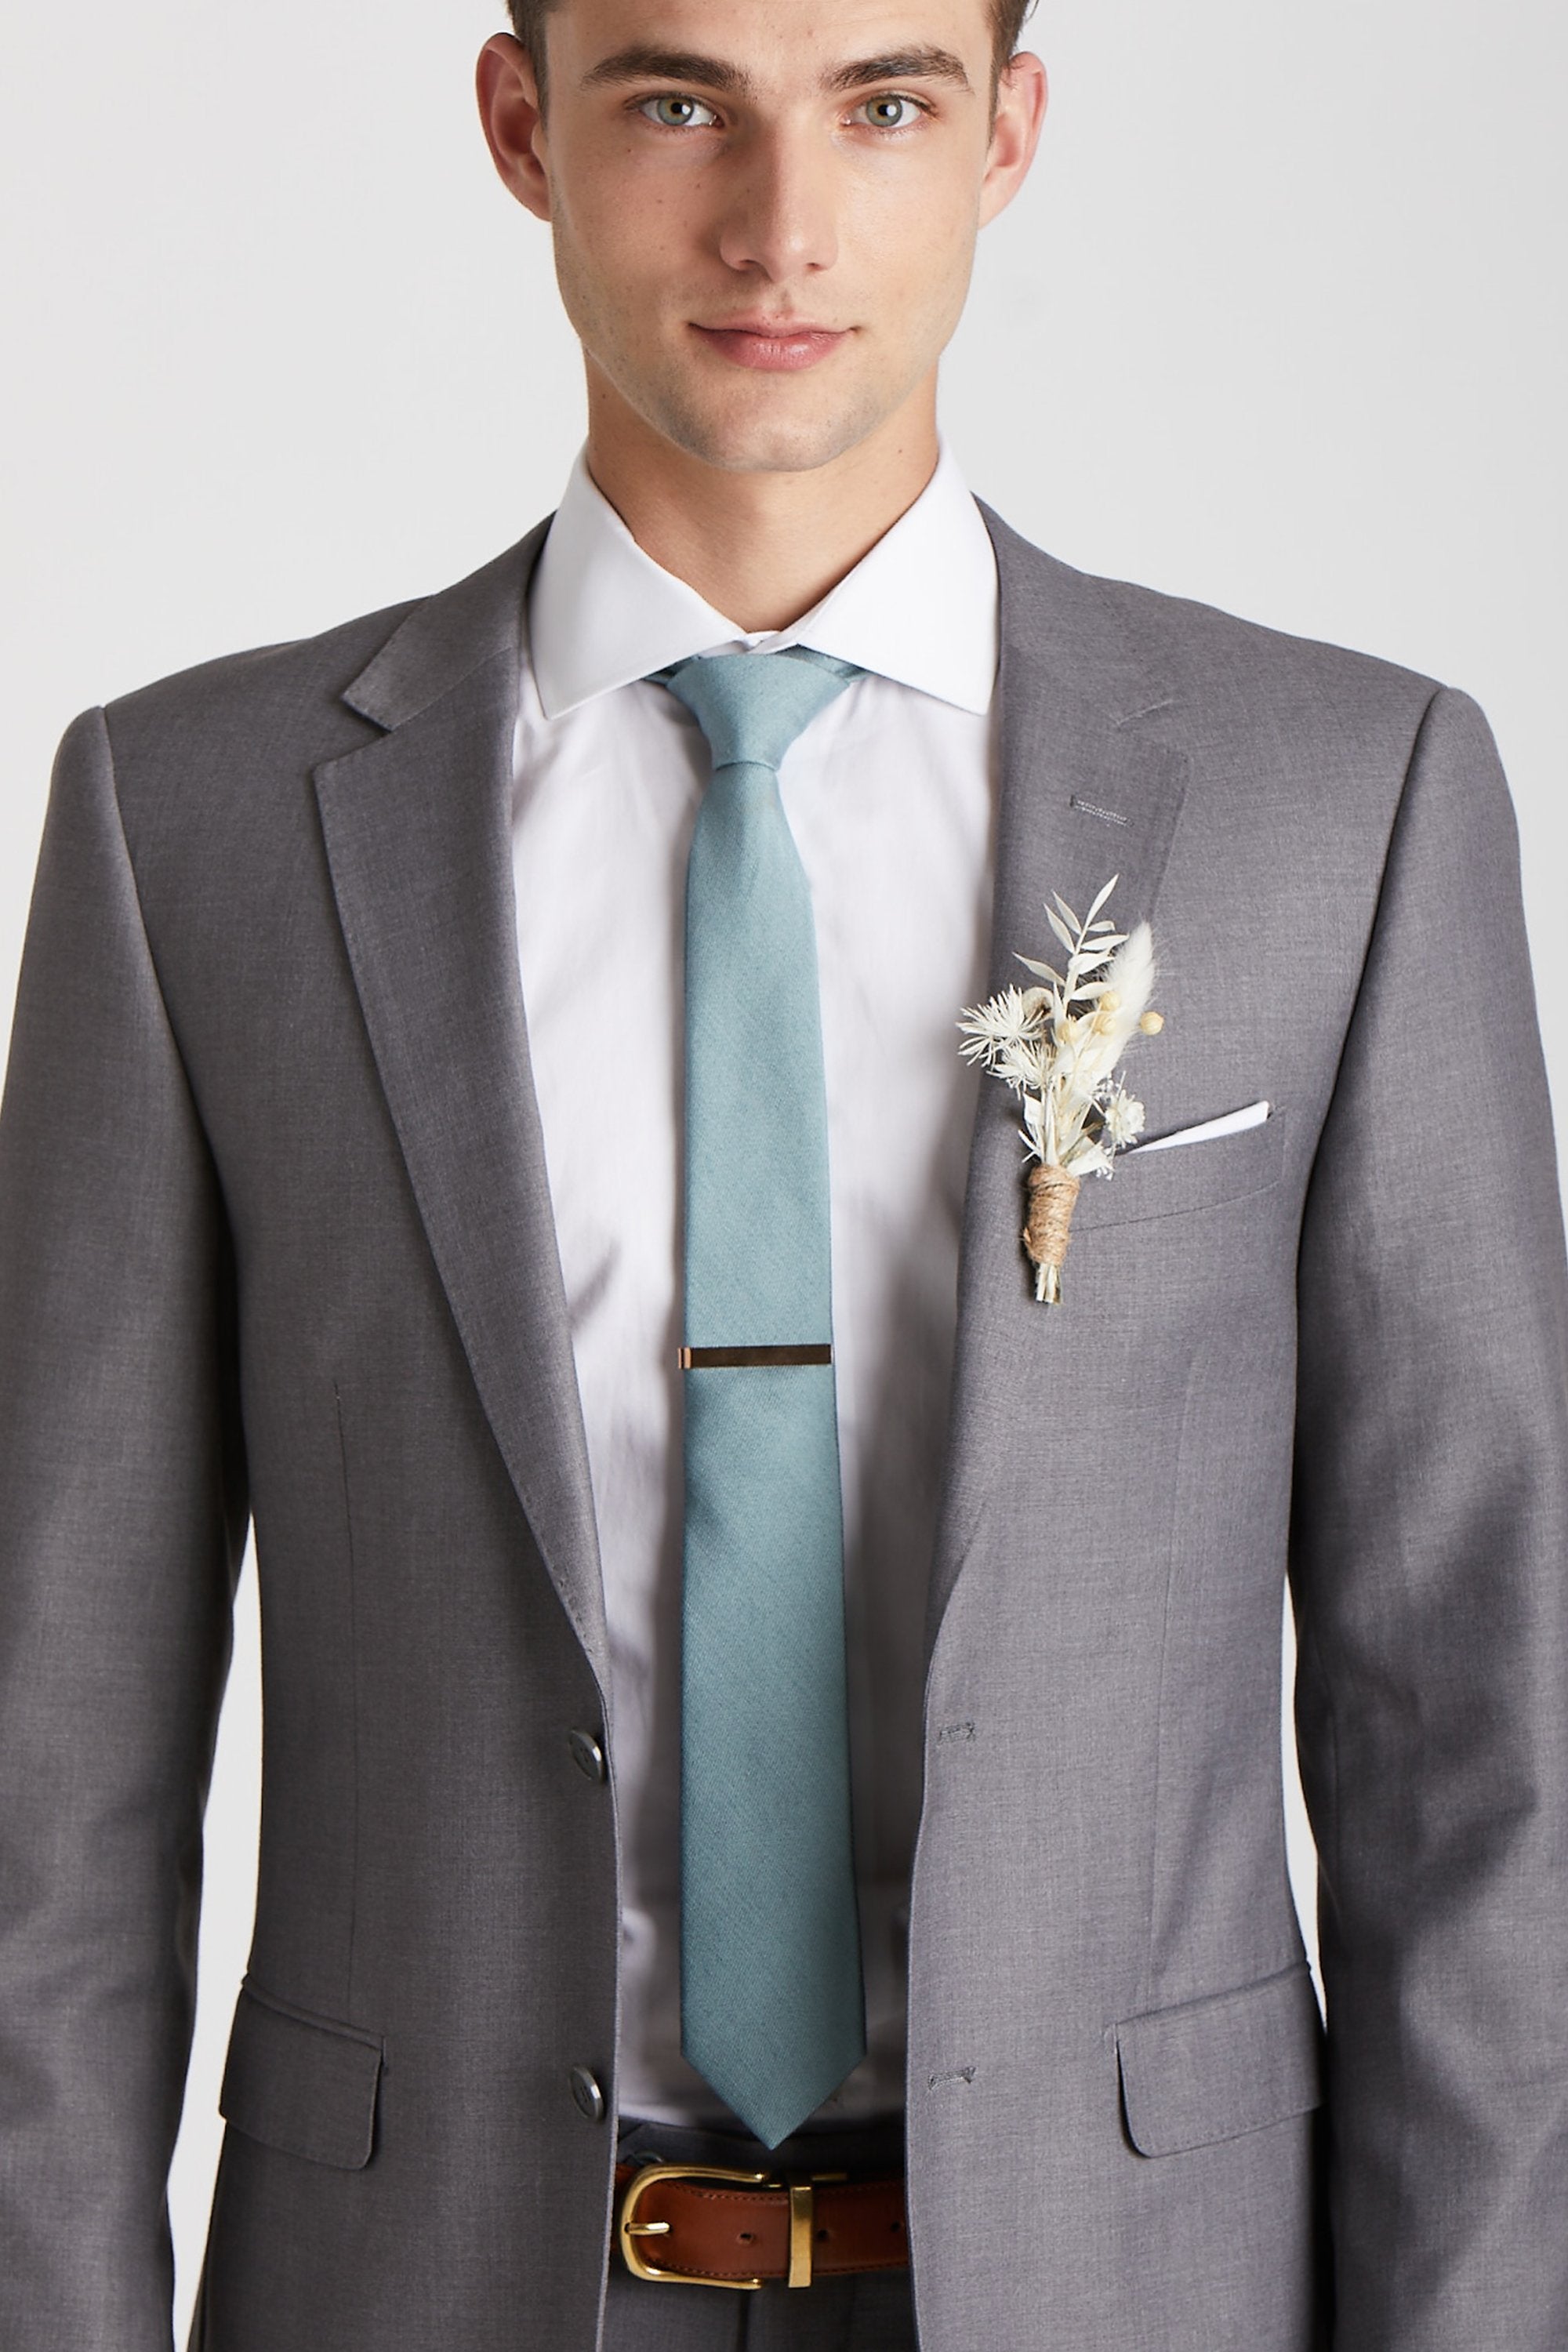 Front closeup view of the model wearing the Simon Necktie in sea glass with a white button down collared shirt and medium grey suit. The tie is kept in place with a narrow rectangular necktie clasp in gold.